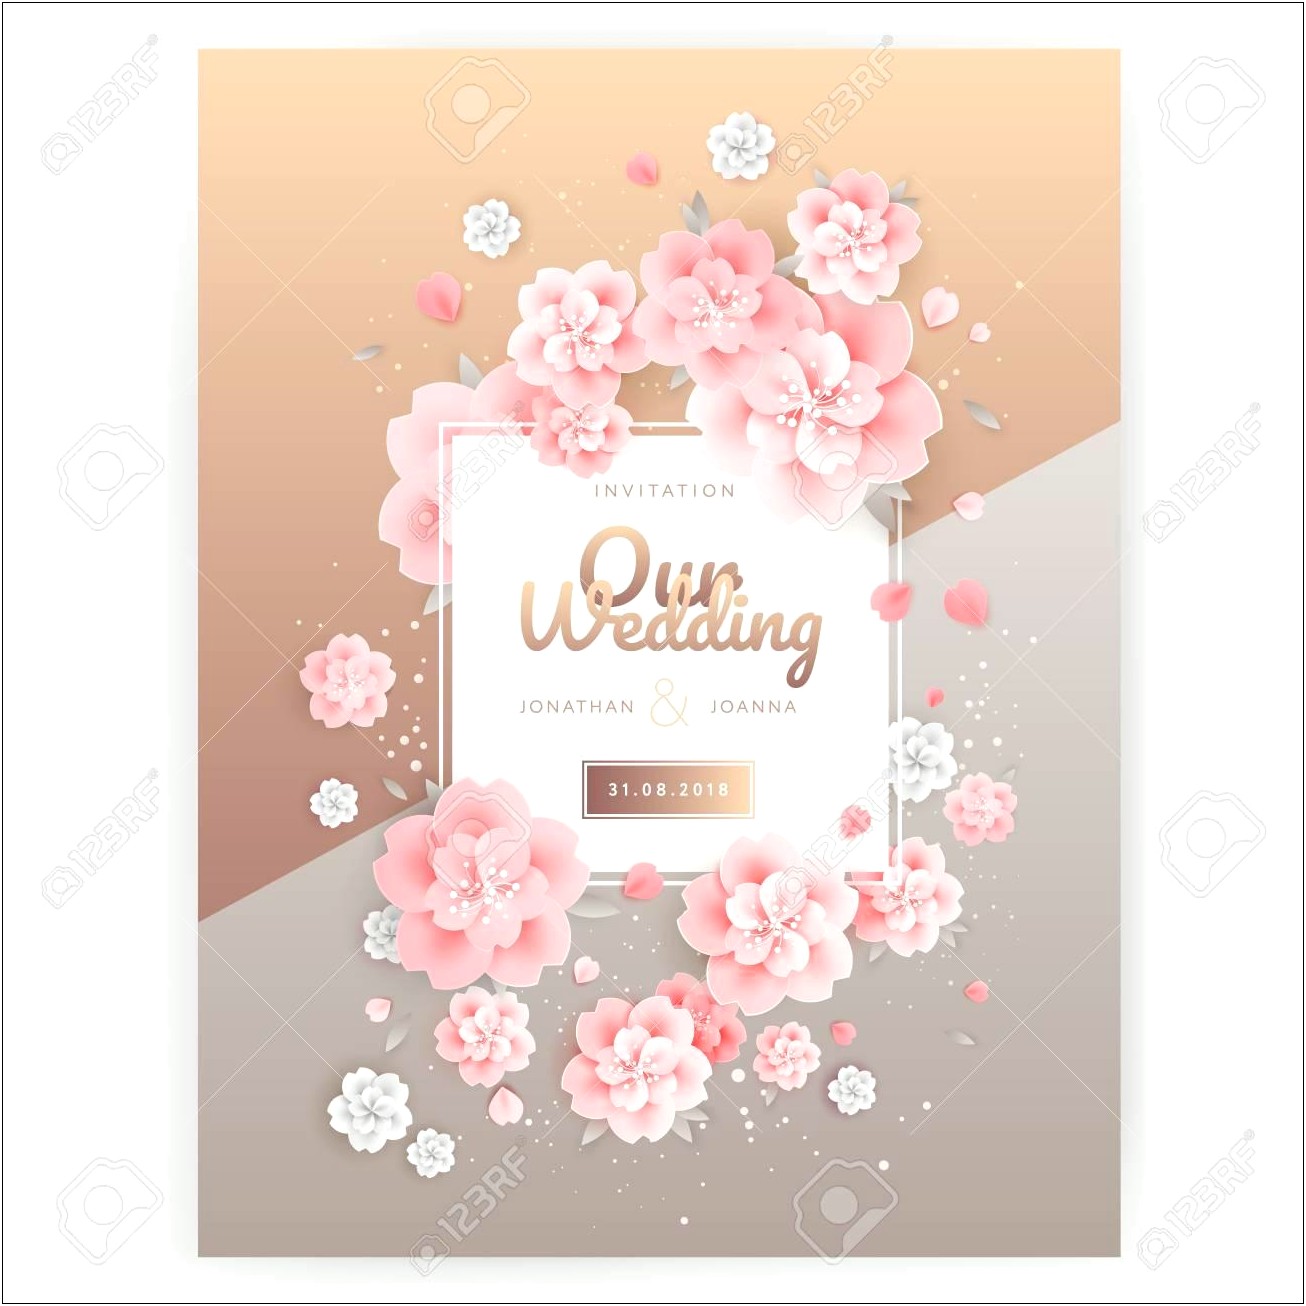 Background Images For Wedding Invitation Card